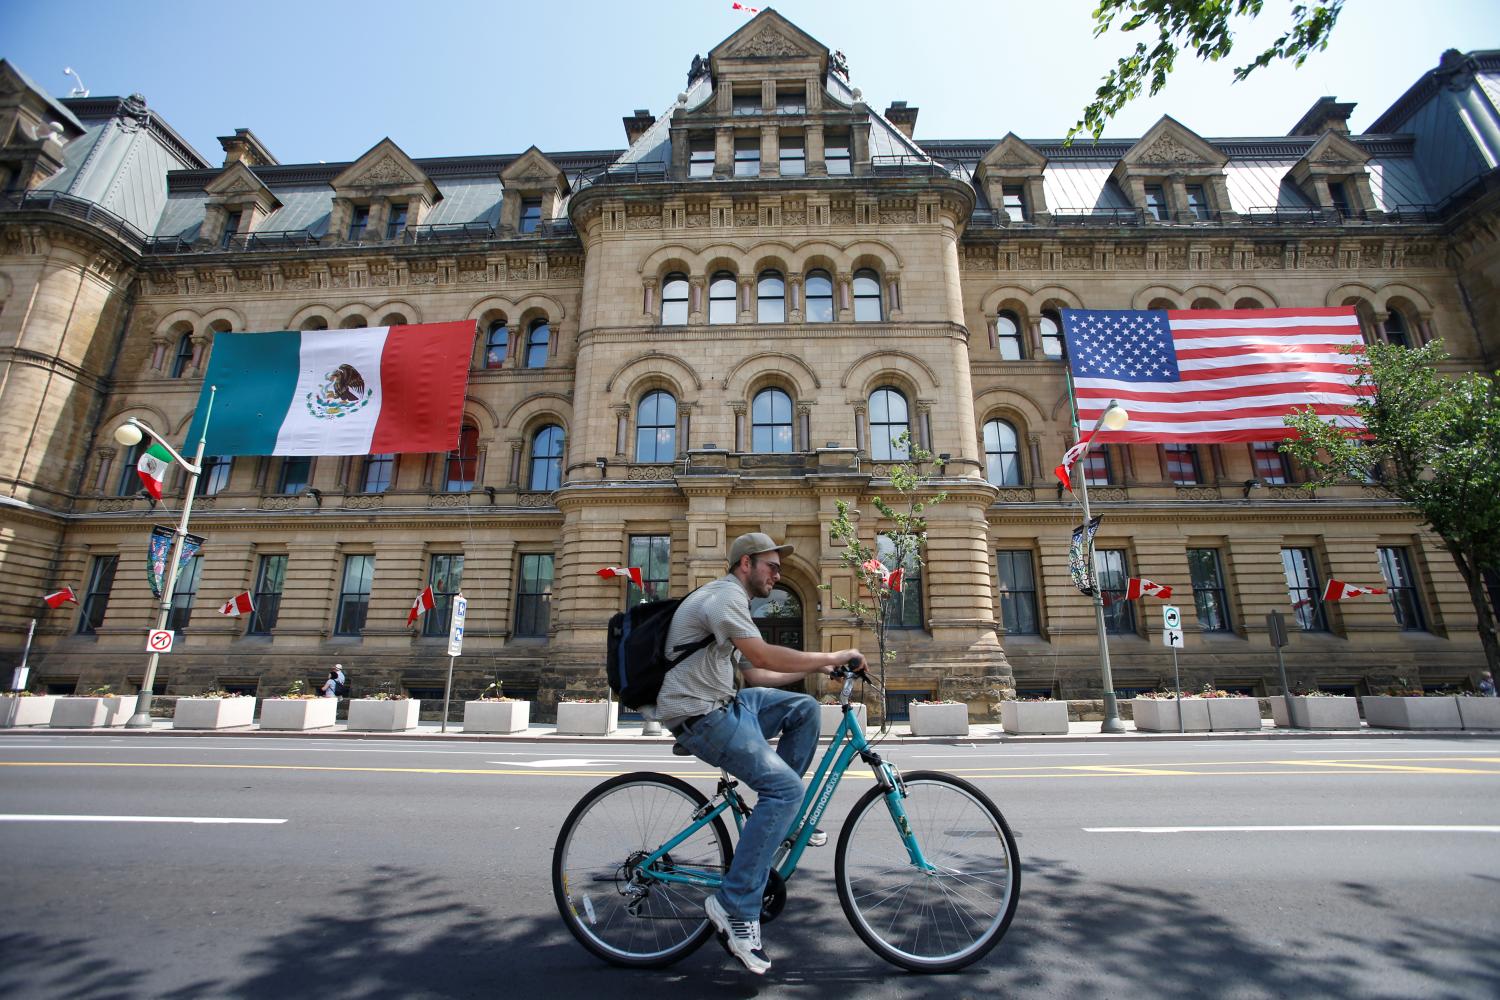 The Mexican and U.S. flags hang from the Langevin Block in advance of Wednesday's North American Leaders' Summit as a cyclist passes by in Ottawa, Ontario, Canada, June 27, 2016. REUTERS/Chris Wattie - RTX2IK28